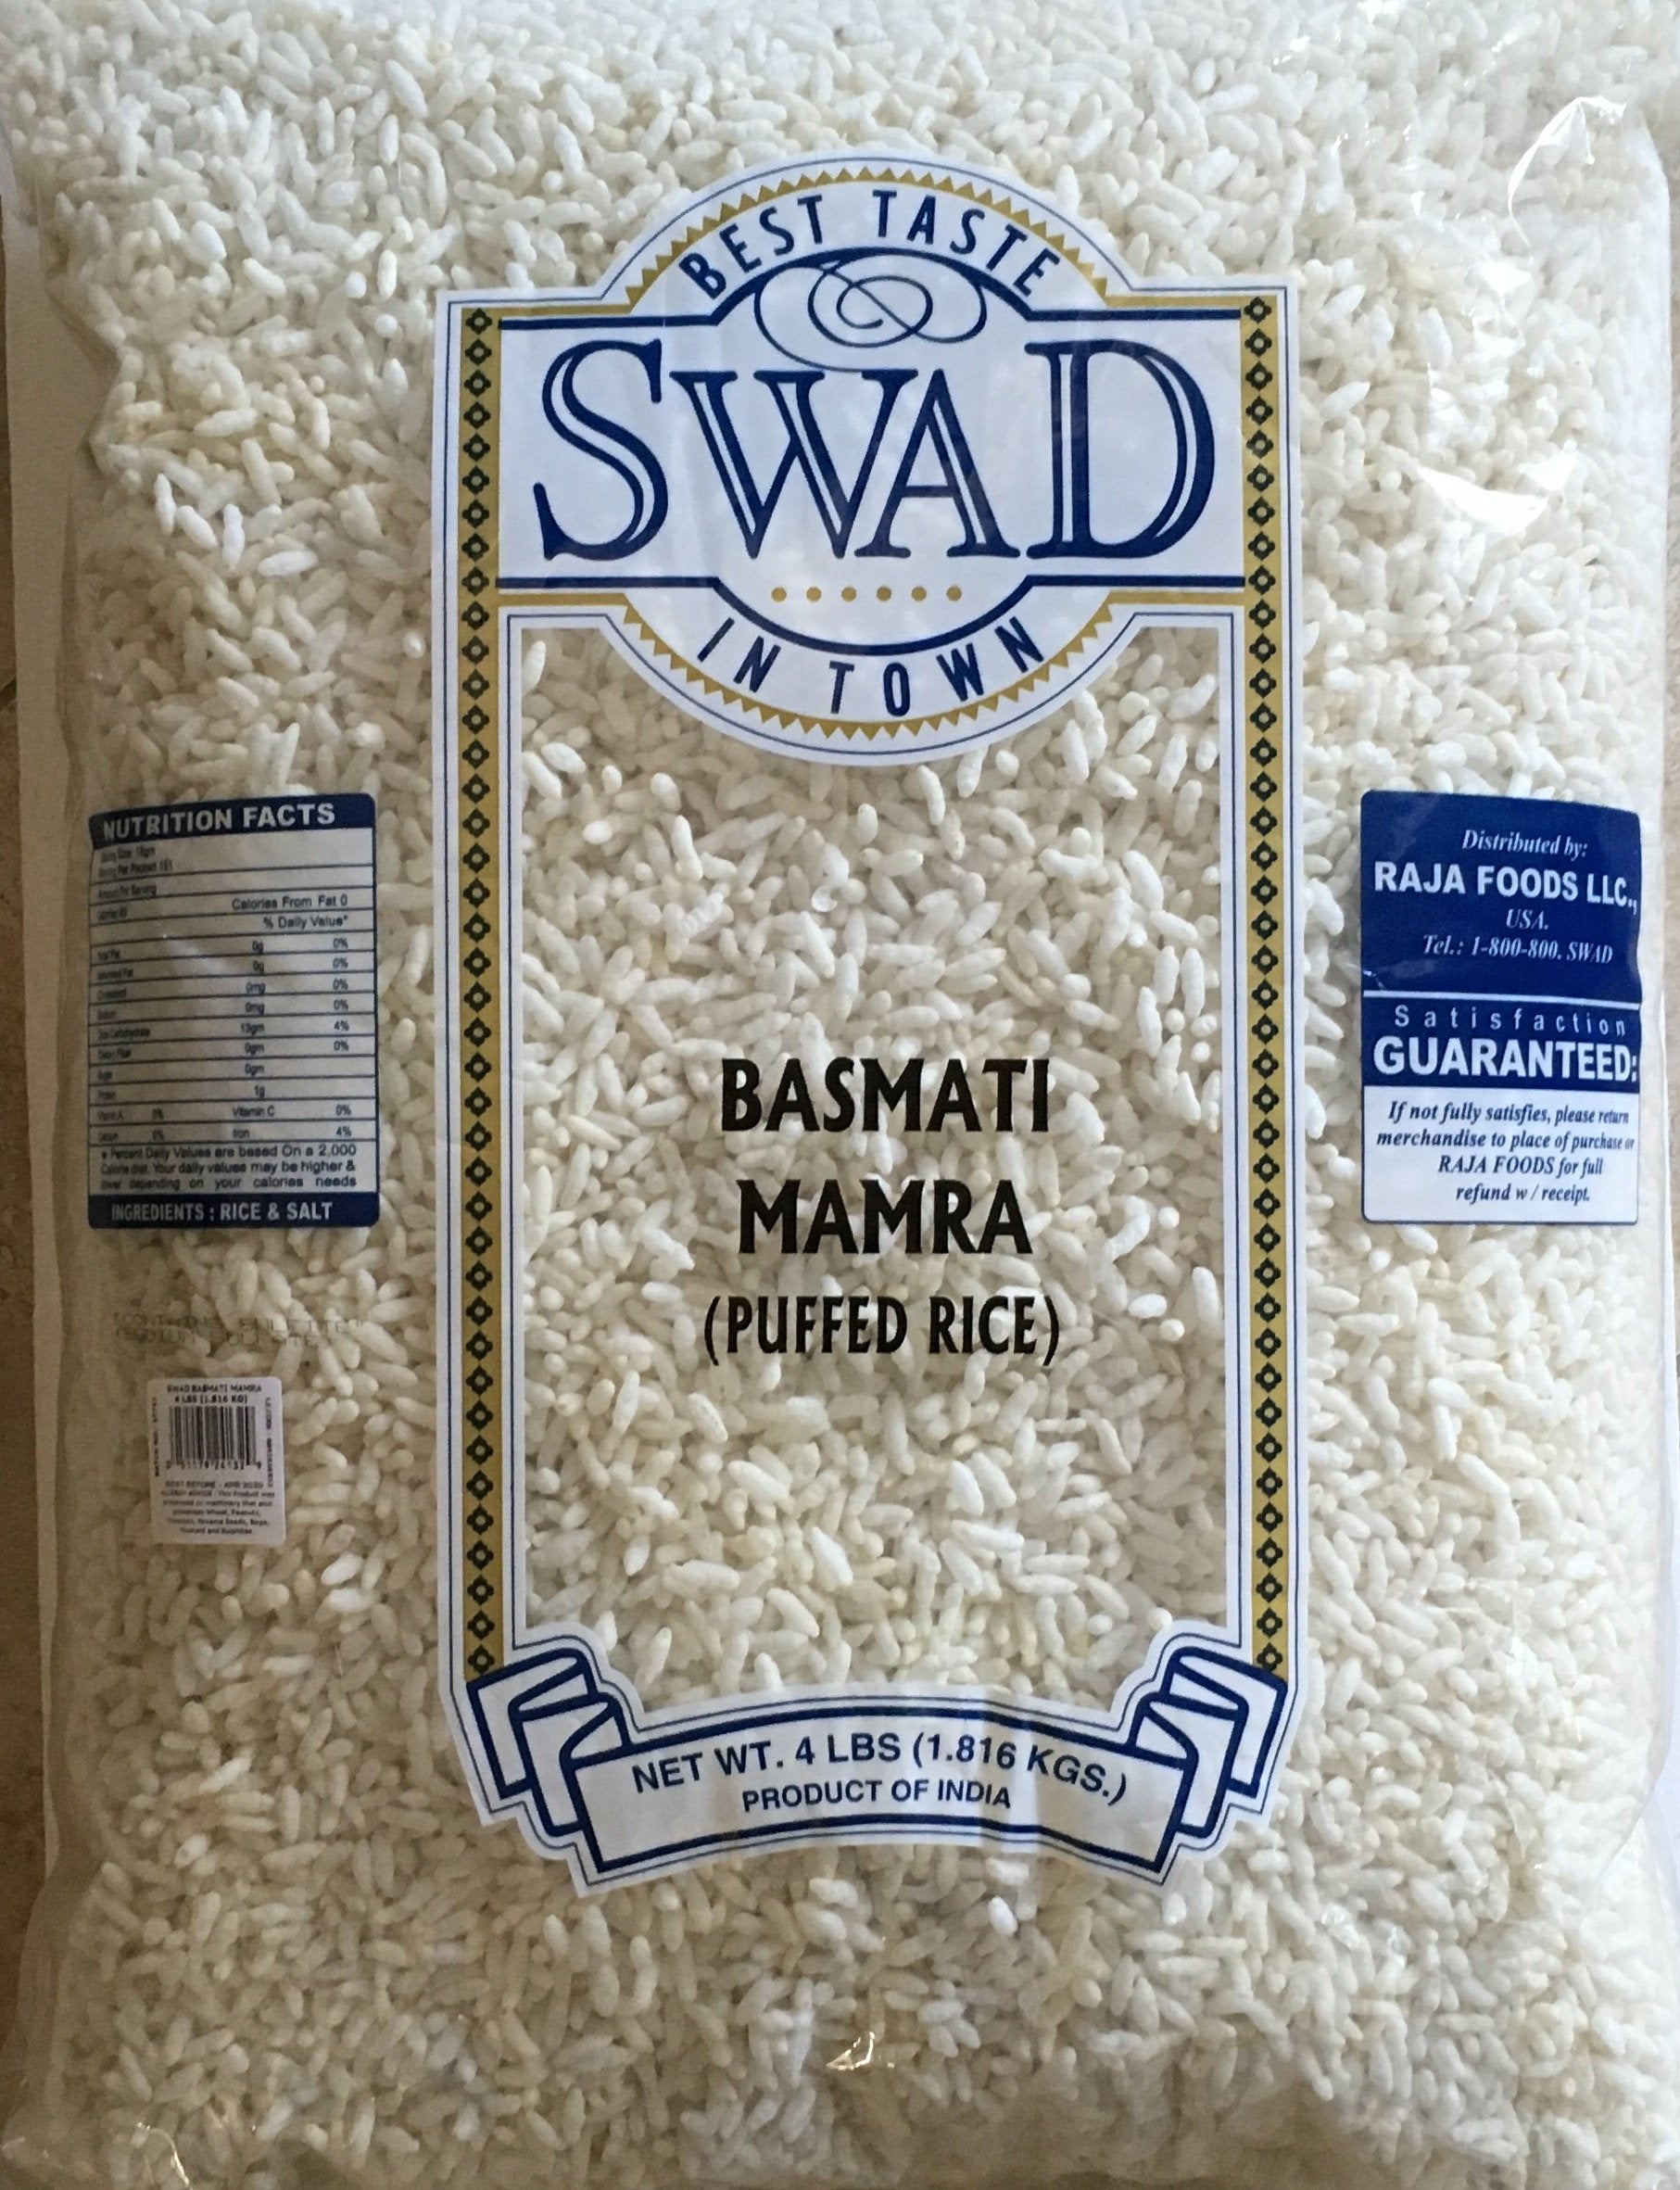 Swad Basmati Mamra (Puffed Rice) - 4 Lbs, 1.816kg, VALUE PACK, Indian Groceries